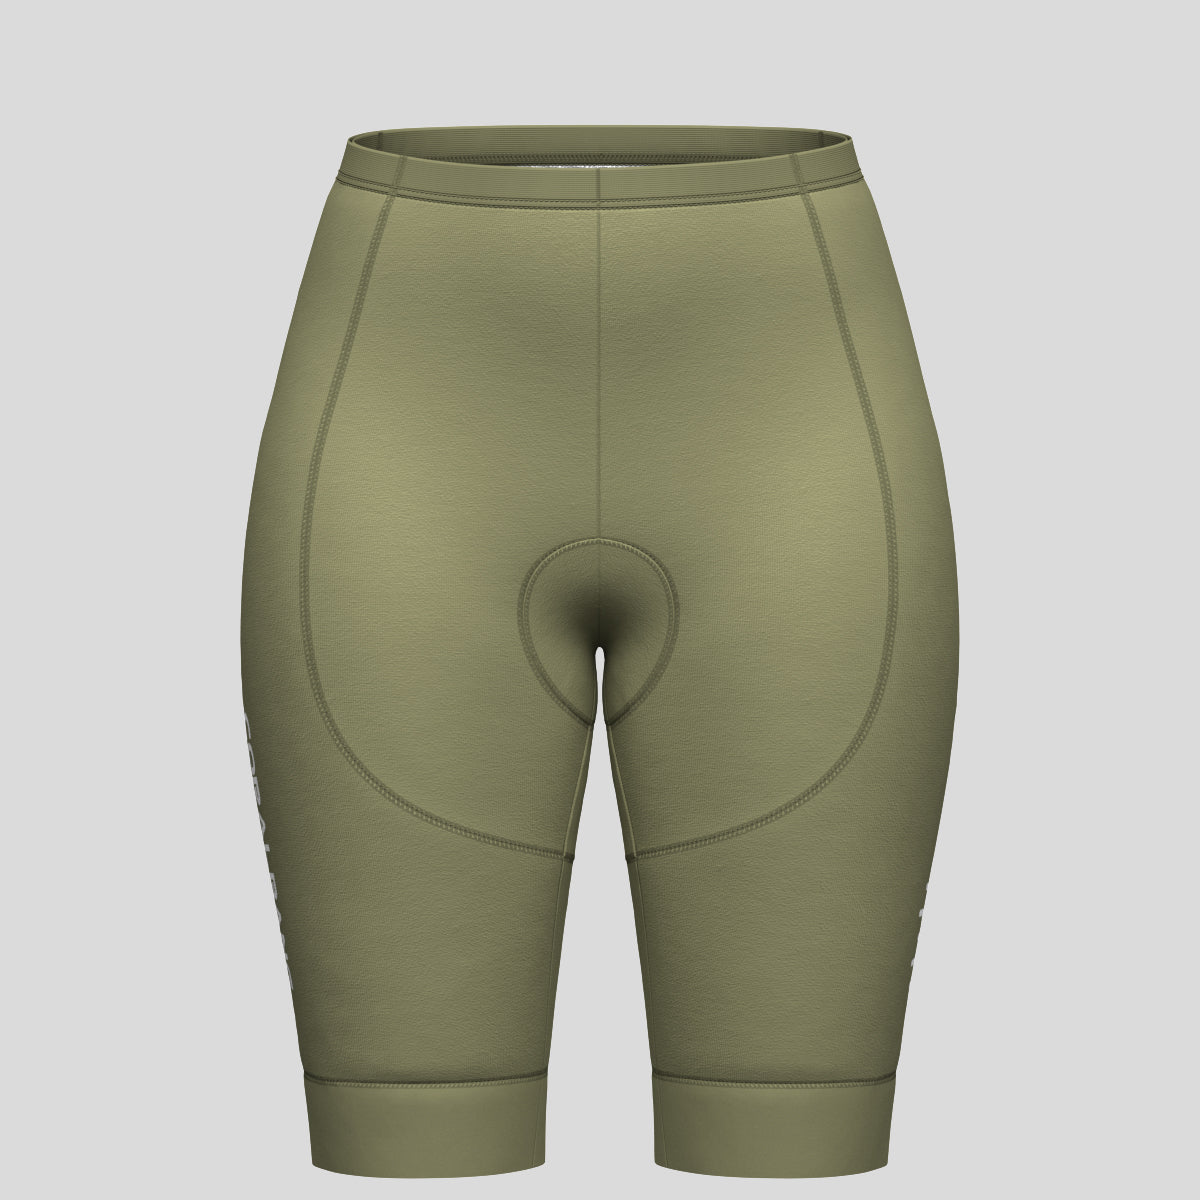 Minimal Solid Women's Cycling Shorts - Olive